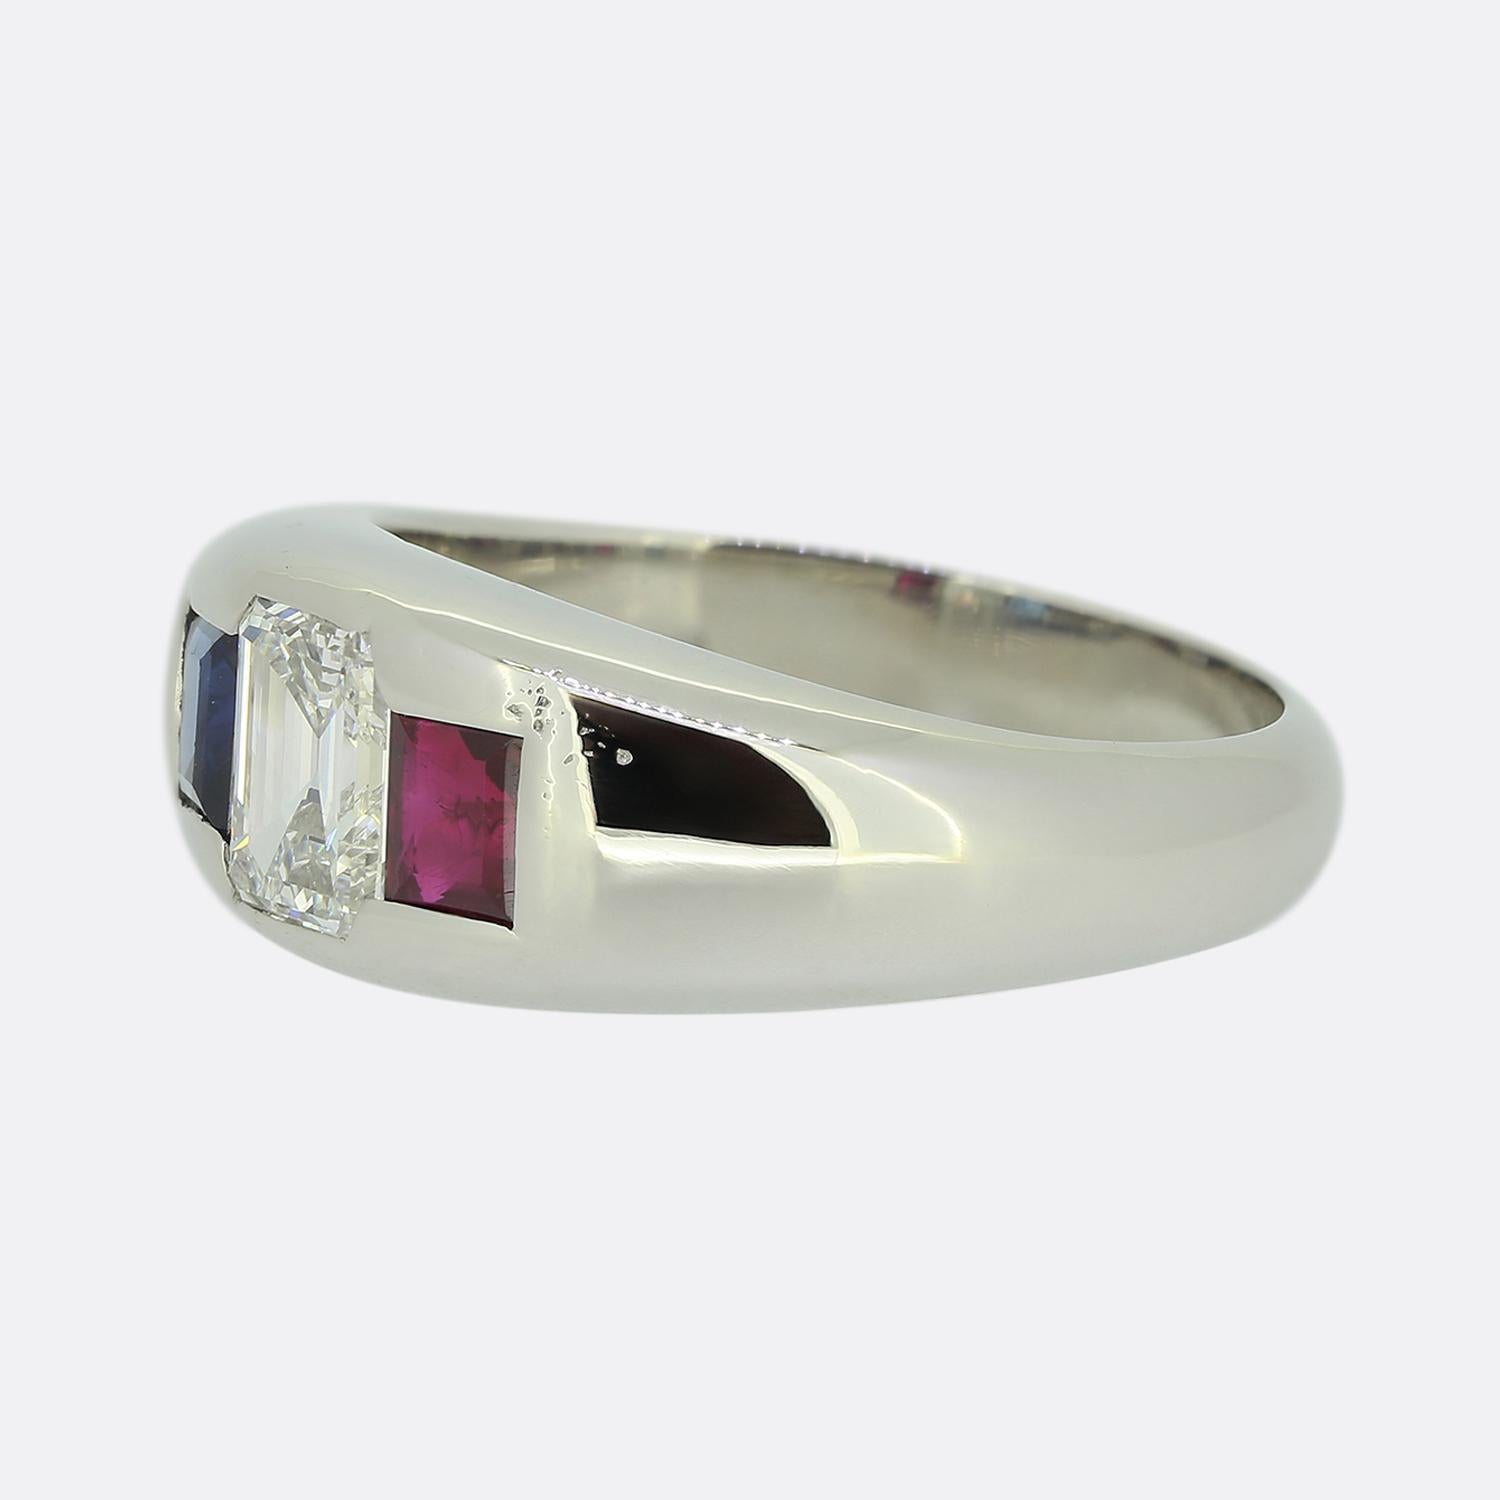 Here we have an outstanding three-stone ring from the renowned Chicago IL based jeweller, J.W Peacock. This piece has been crafted from platinum and showcases a fabulous trio of precious gemstones. A bright white 1.10ct emerald cut diamond sits at